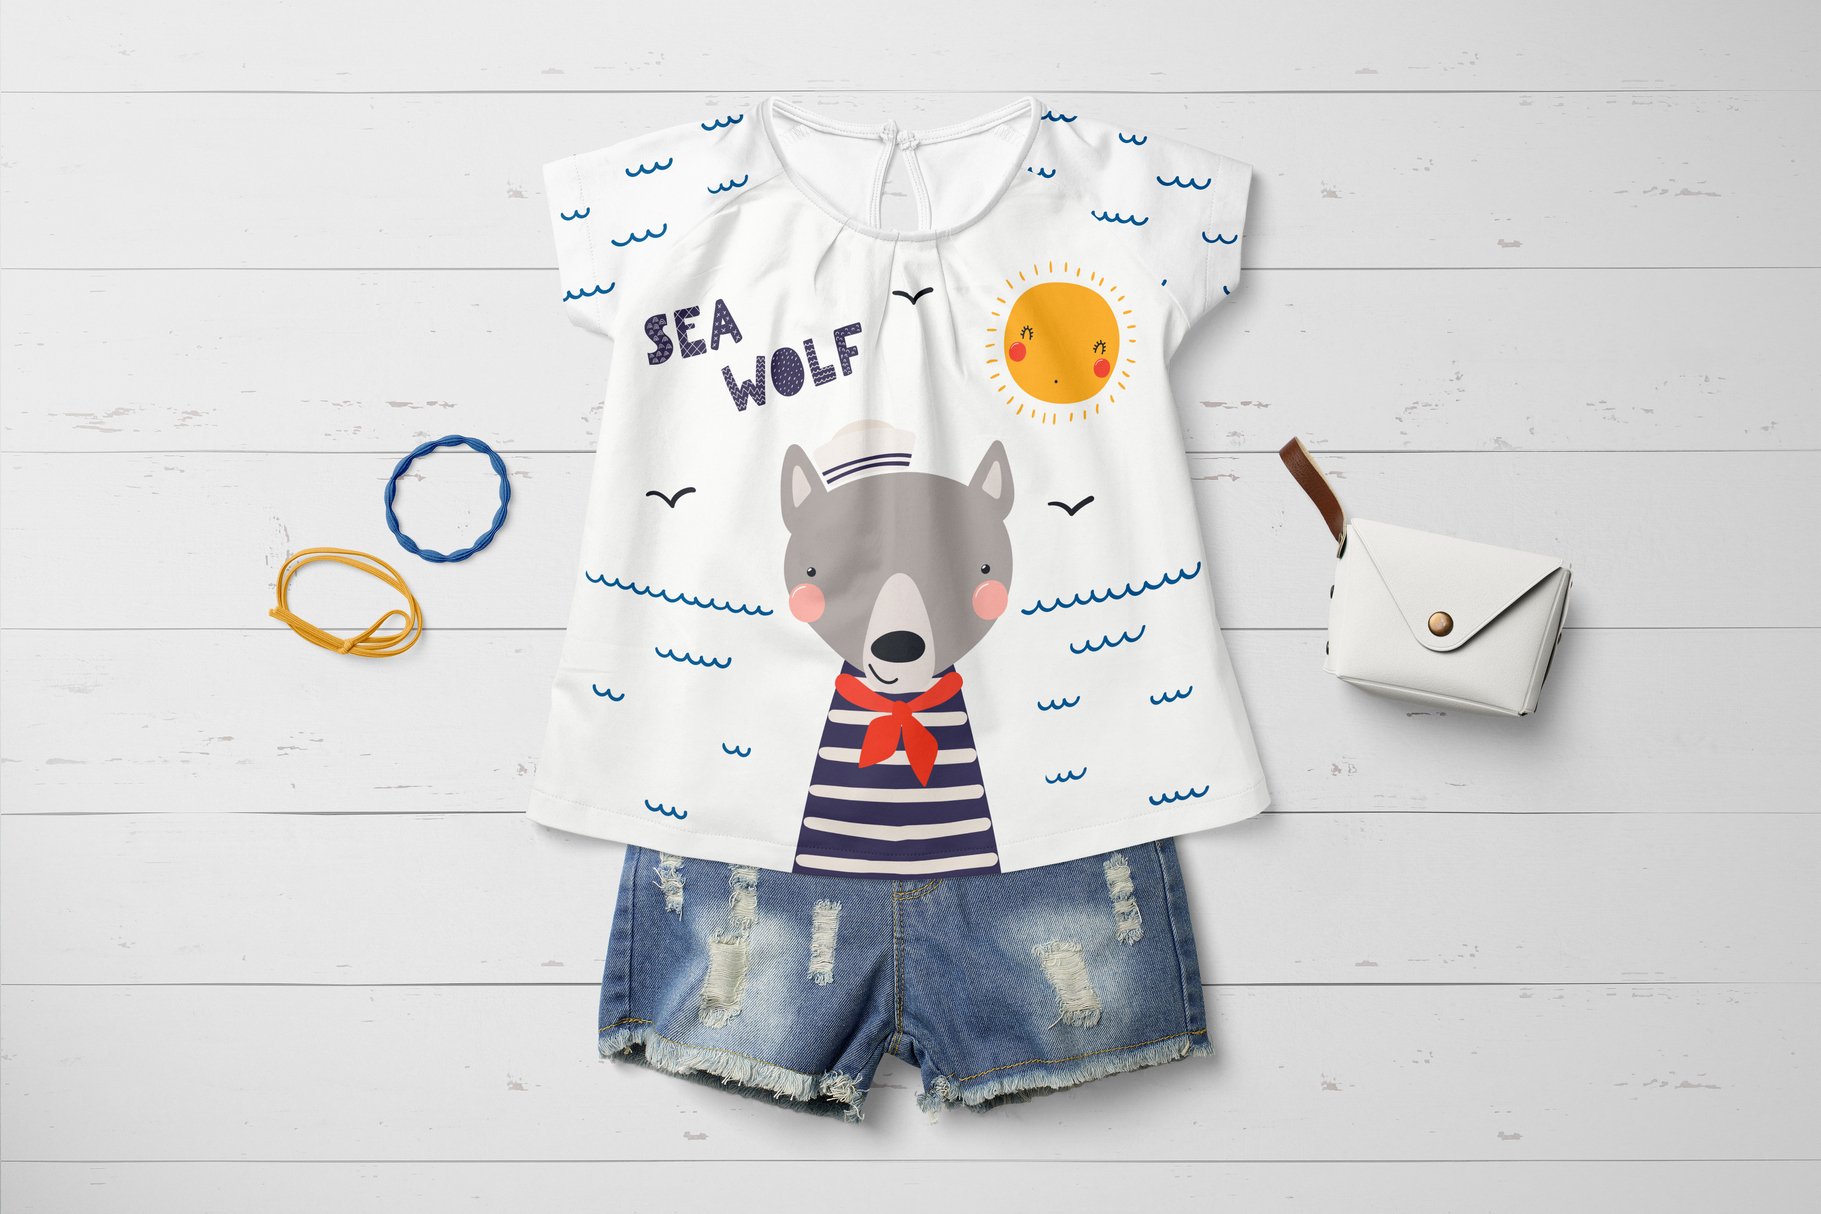 Kid's clothe with a sea illustration.